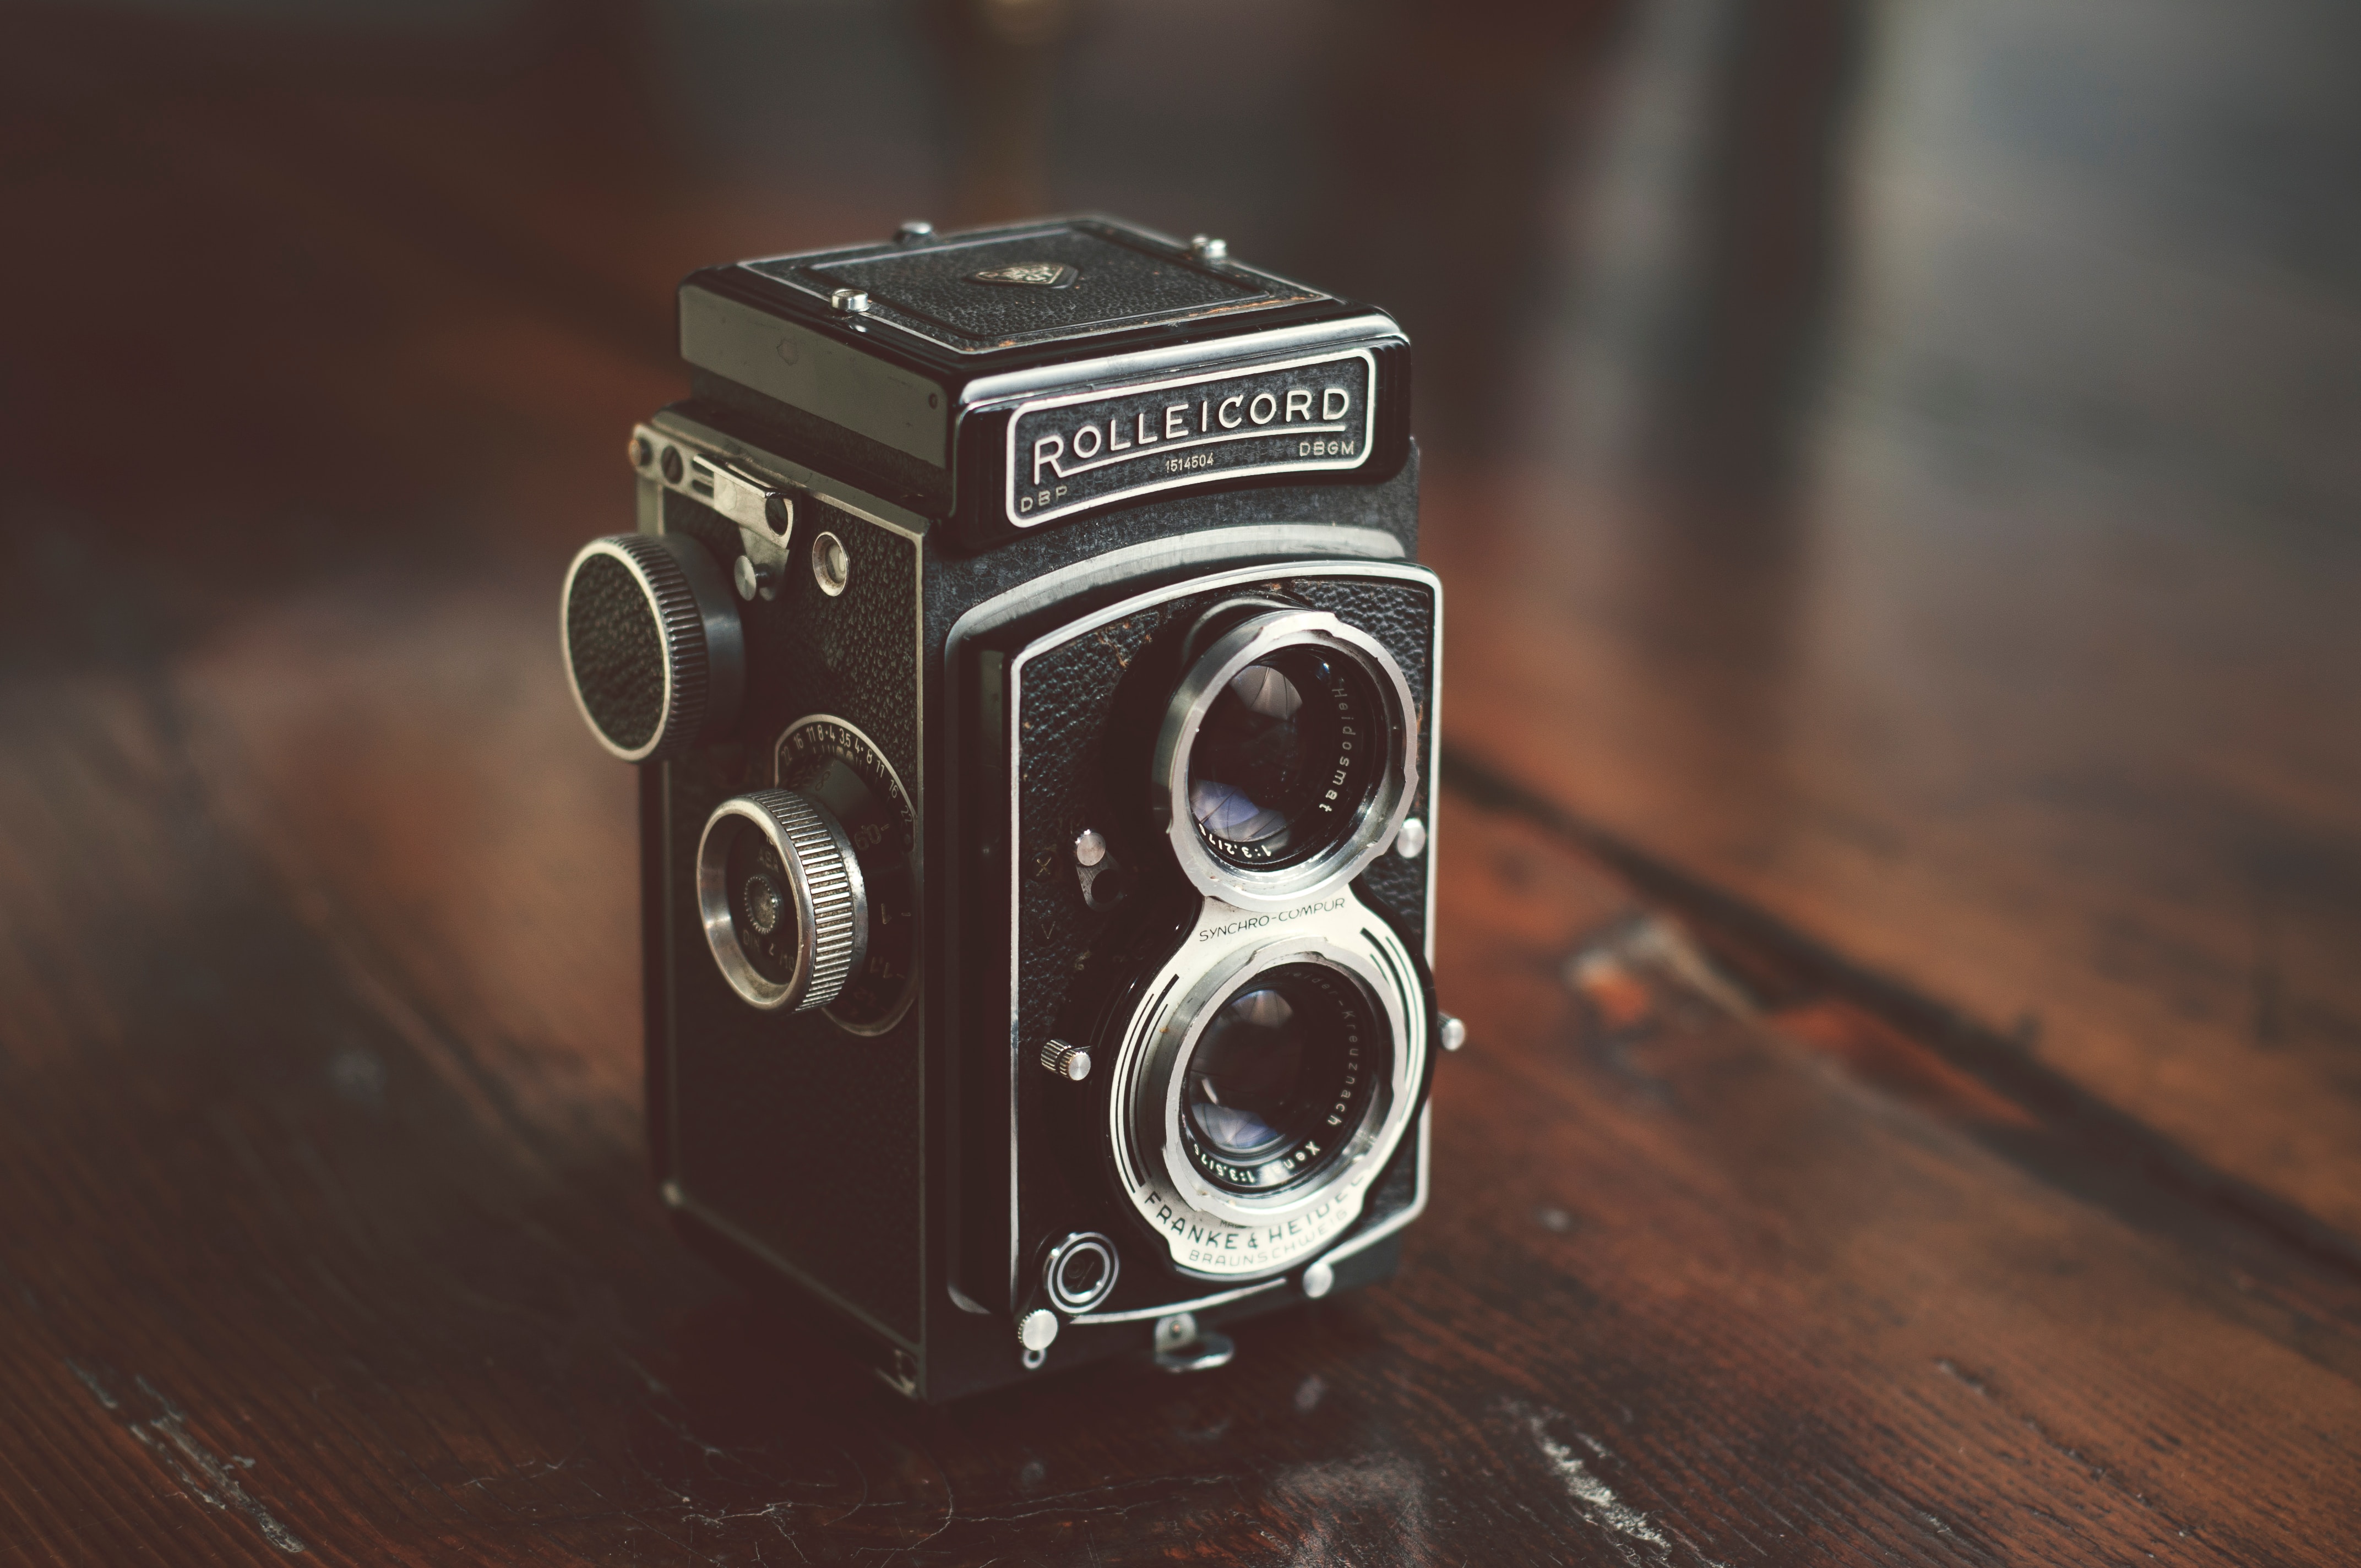 photography, camera, old, vintage, lenses, technologies, technology, photo